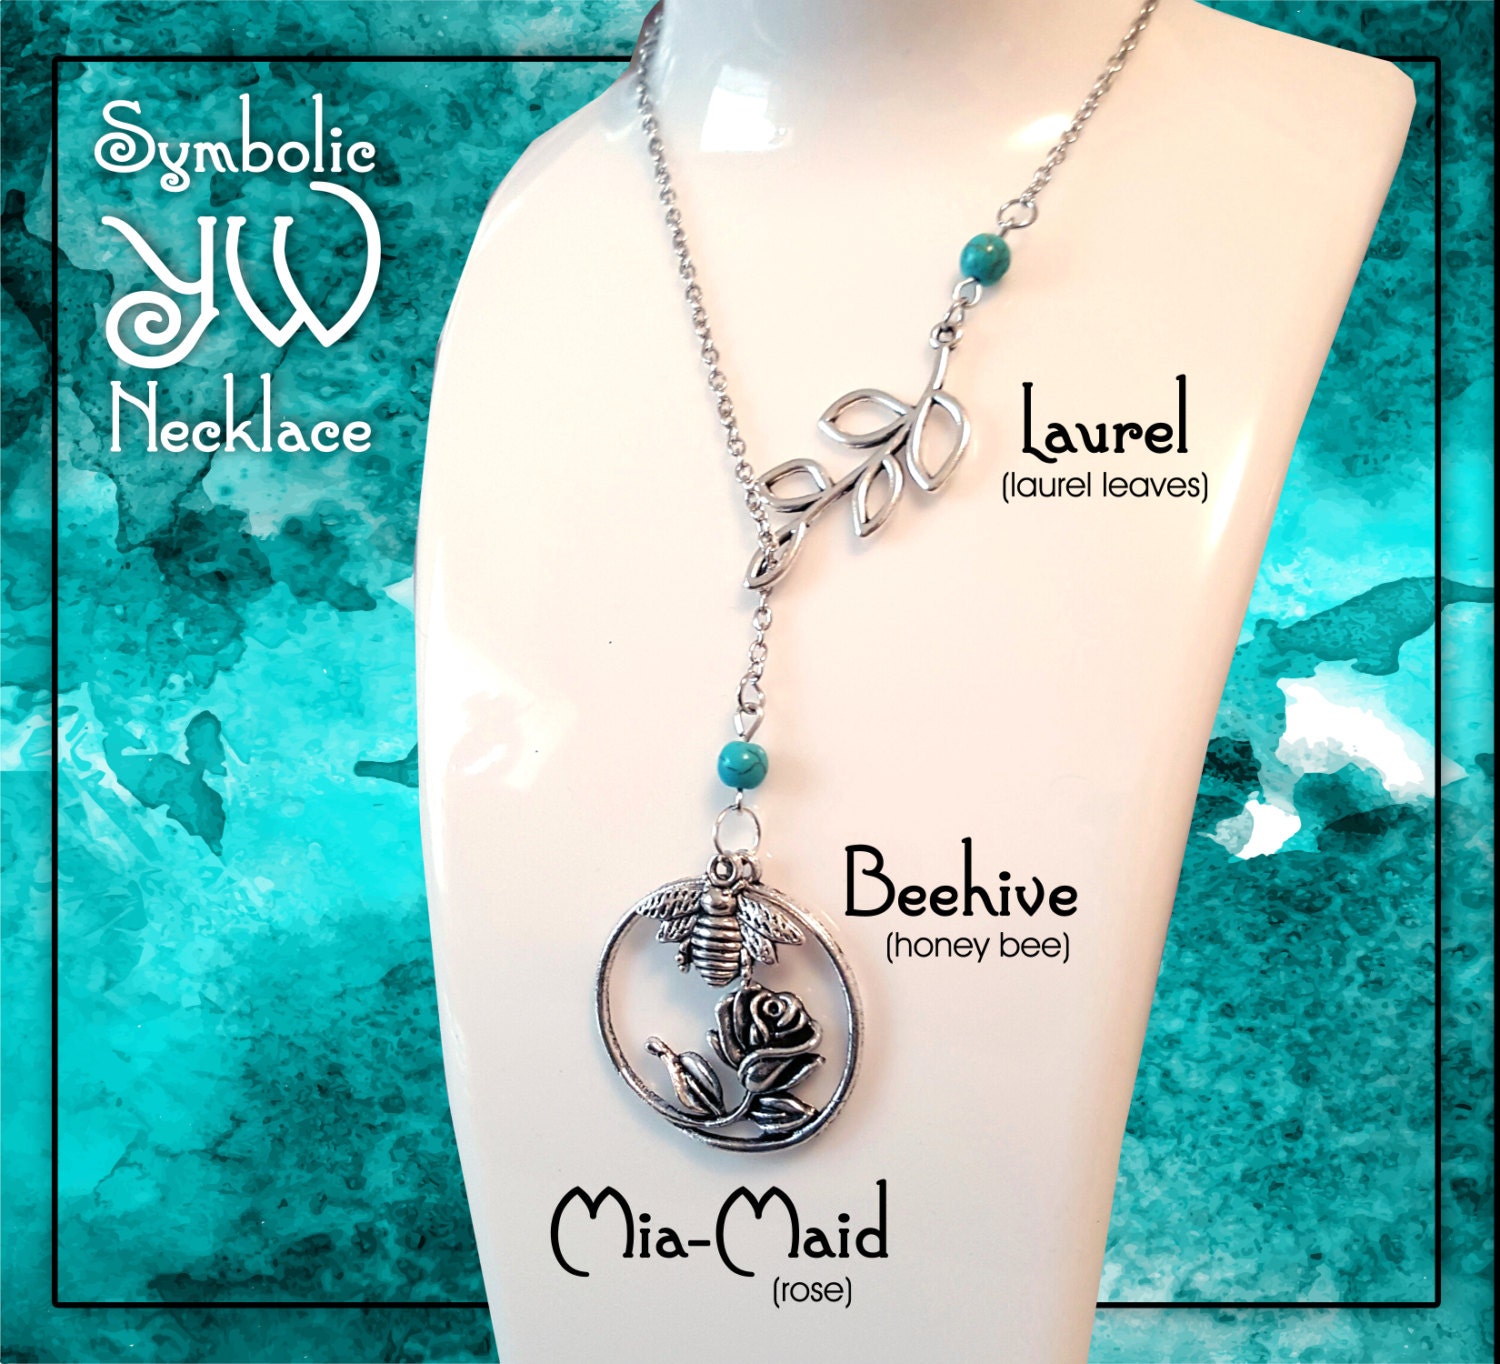 Symbolic YW Necklace for LDS Young Women. Charms representing